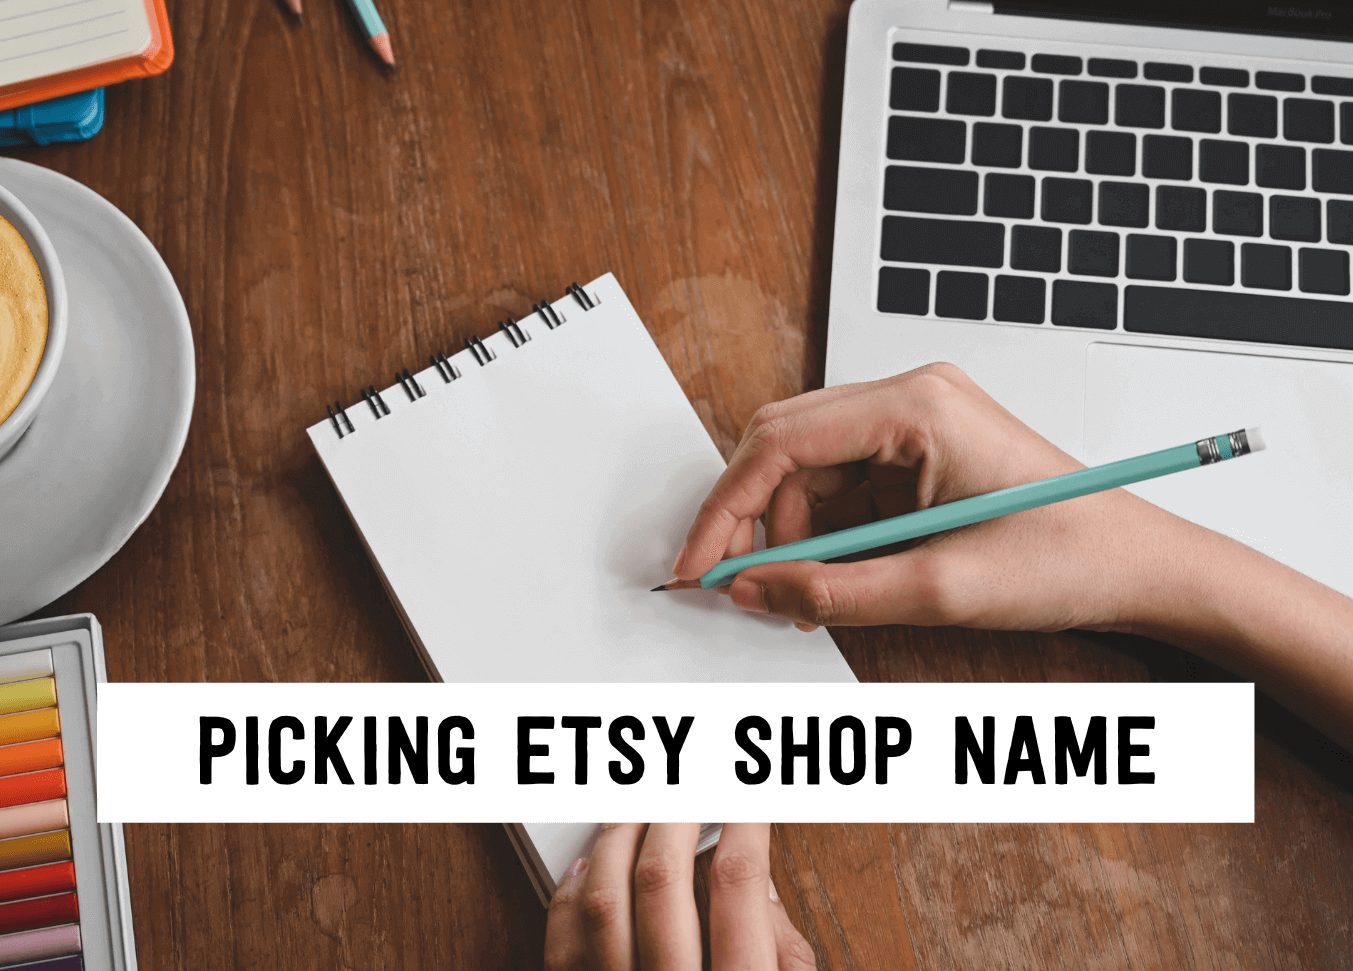 Picking etsy shop name | Tizzit.co - start and grow a successful handmade business